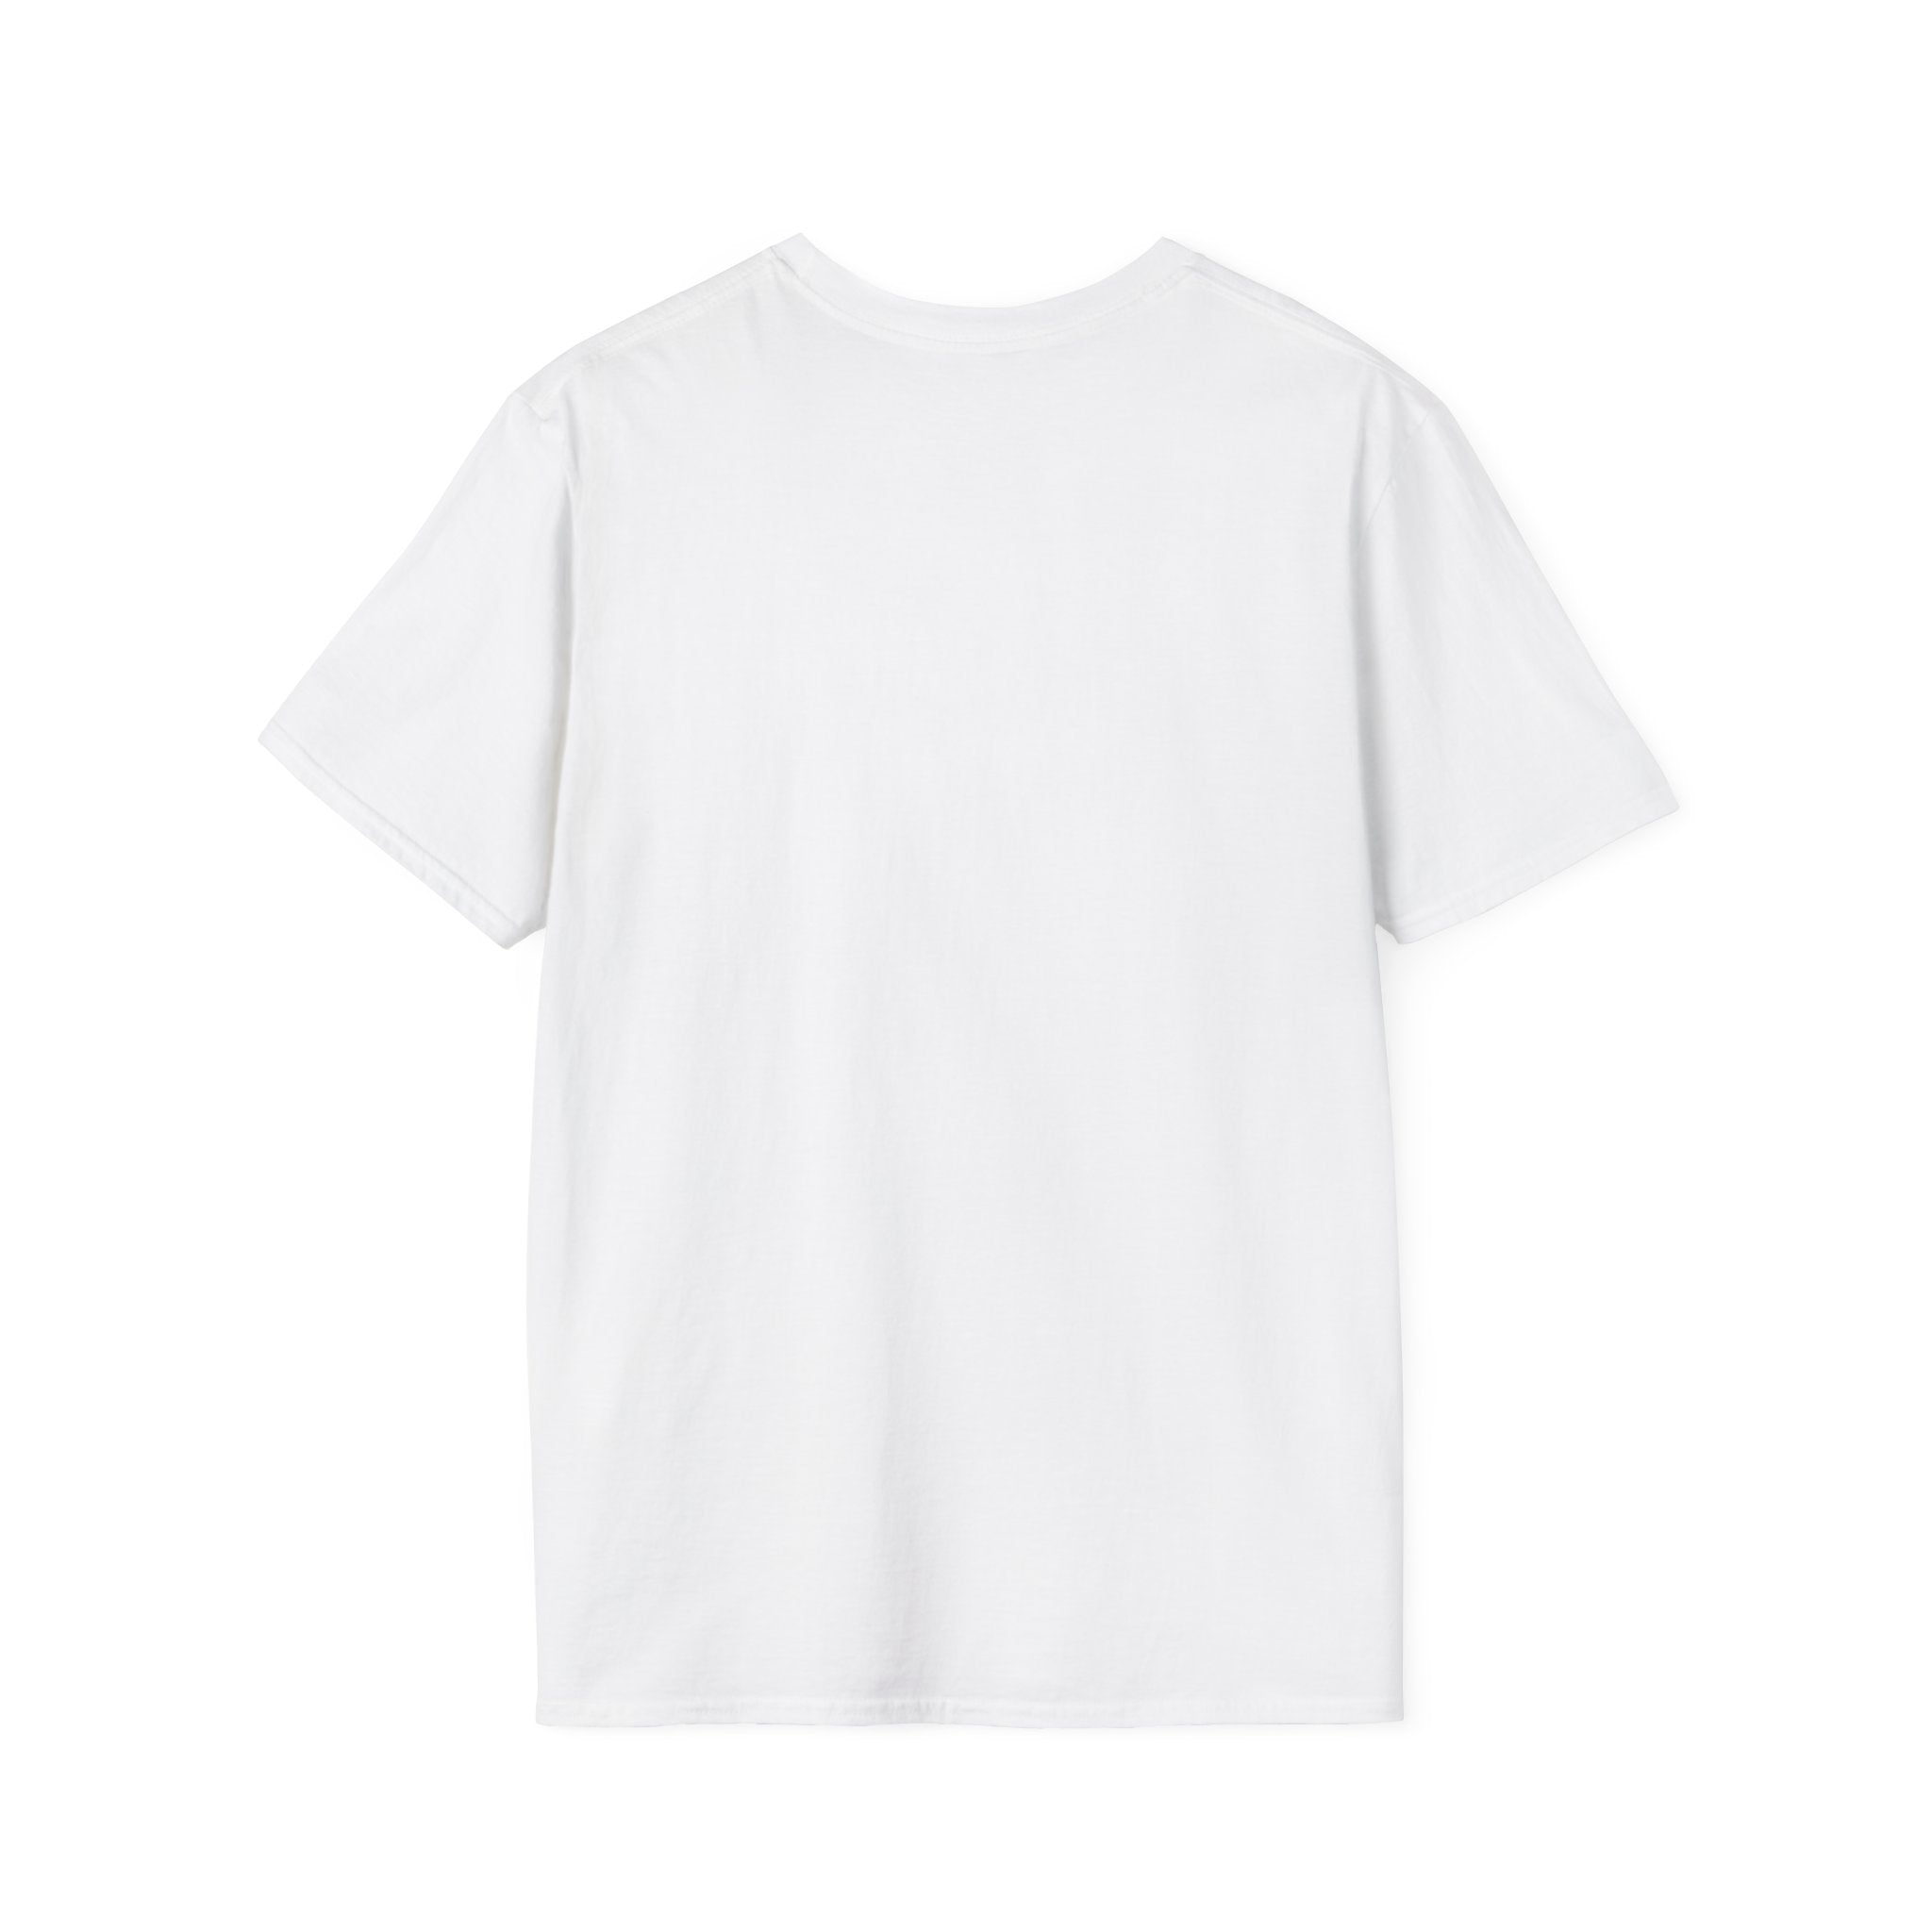 A soft and relaxed fit Skater Angel t-shirt on a white background.